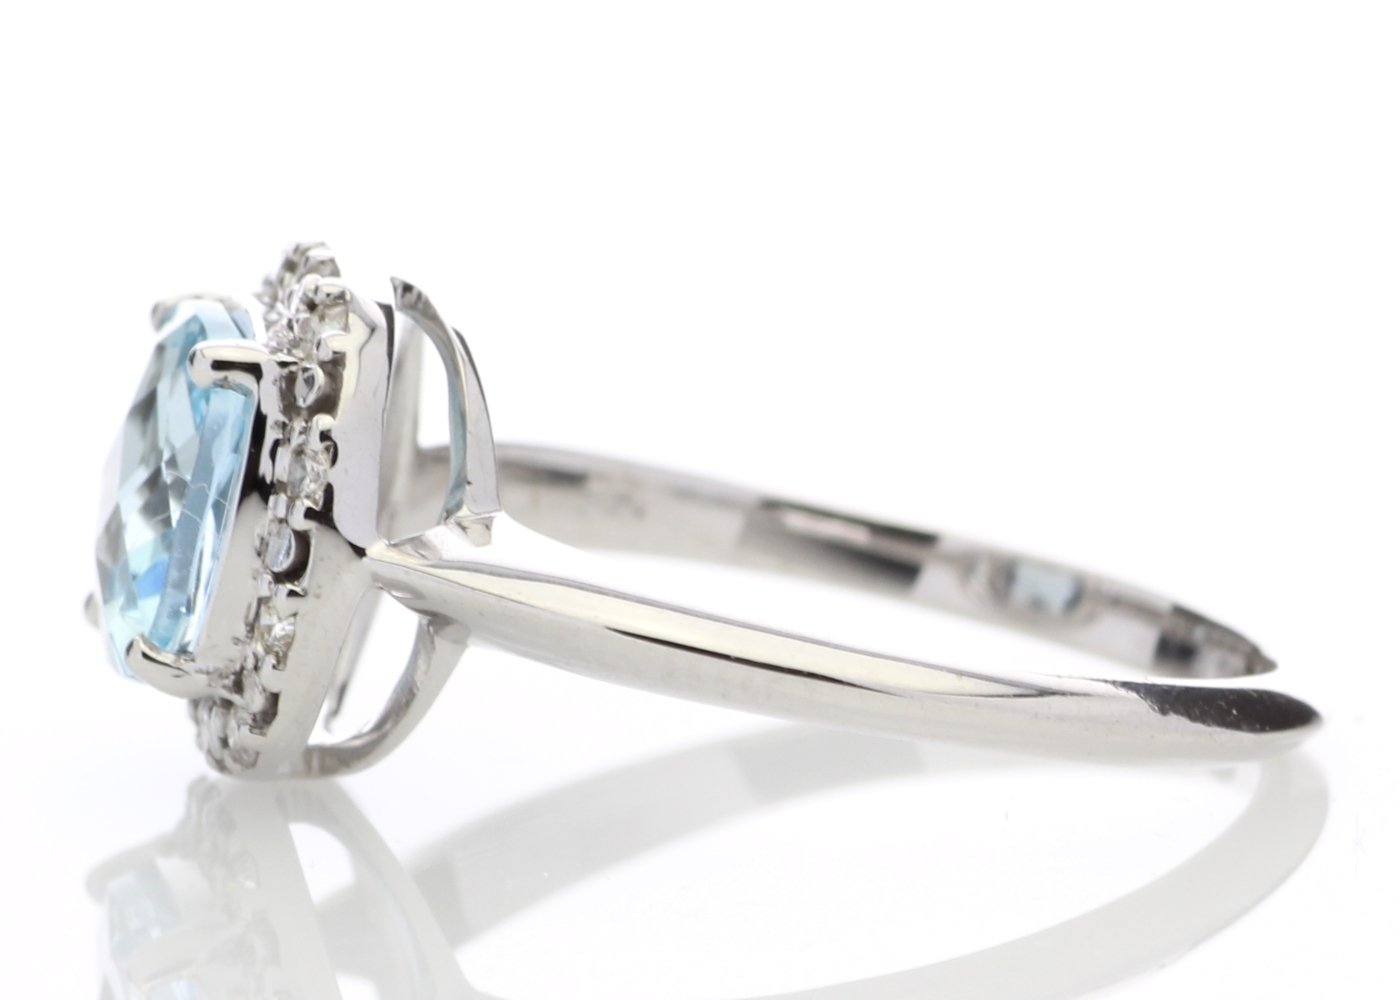 9ct White Gold Diamond And Blue Topaz Ring (BT1.79) 0.10 Carats - Valued By GIE £1,920.00 - A - Image 3 of 10